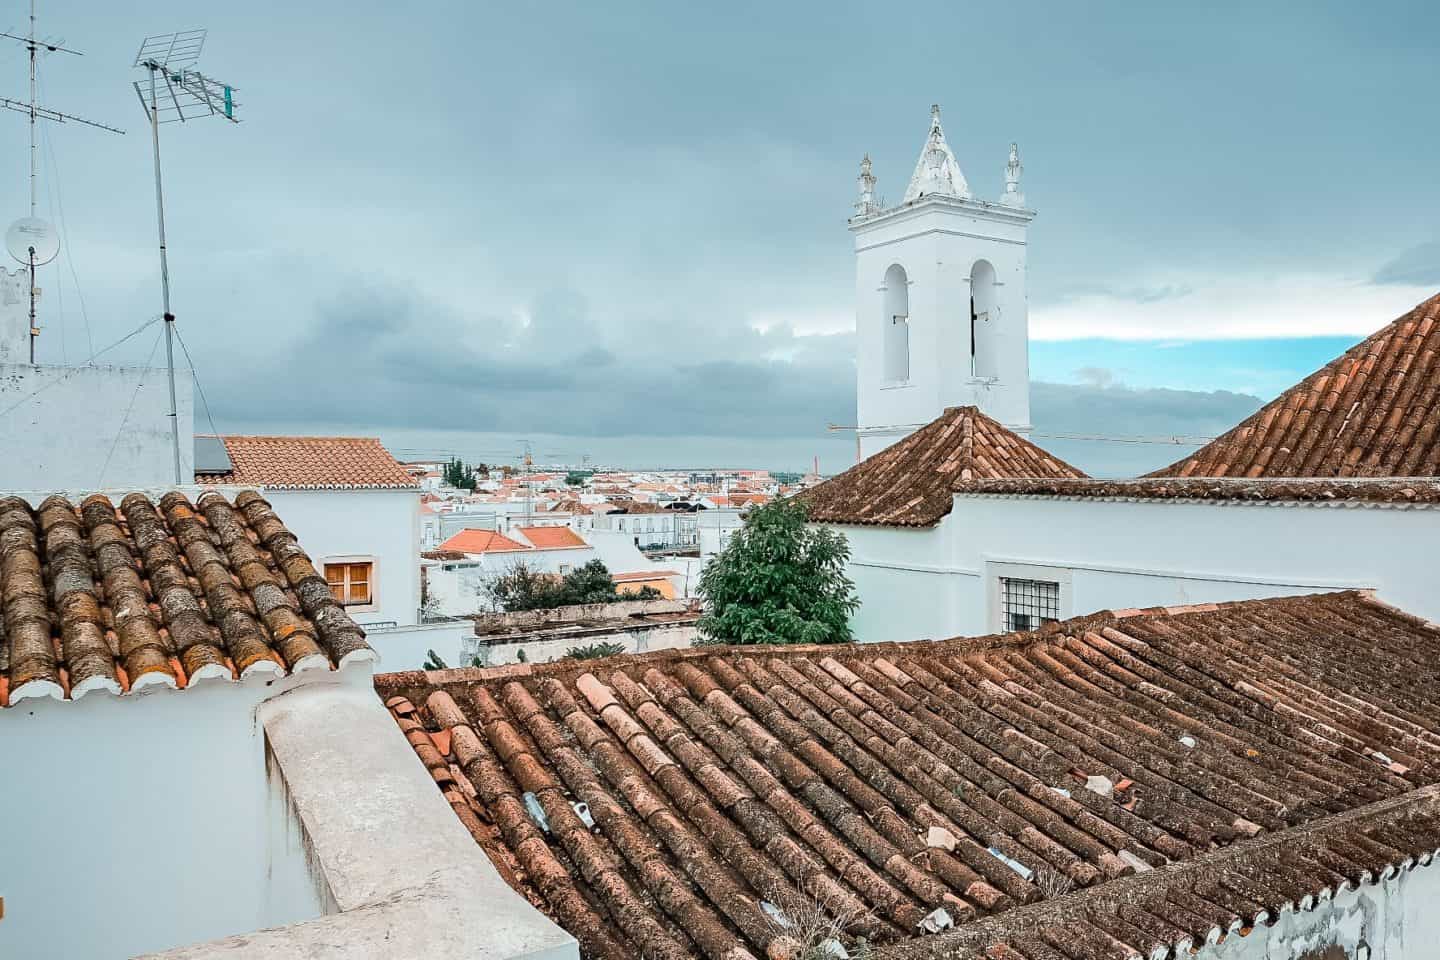 Things to do near Faro. View of the roofs in Tavira.